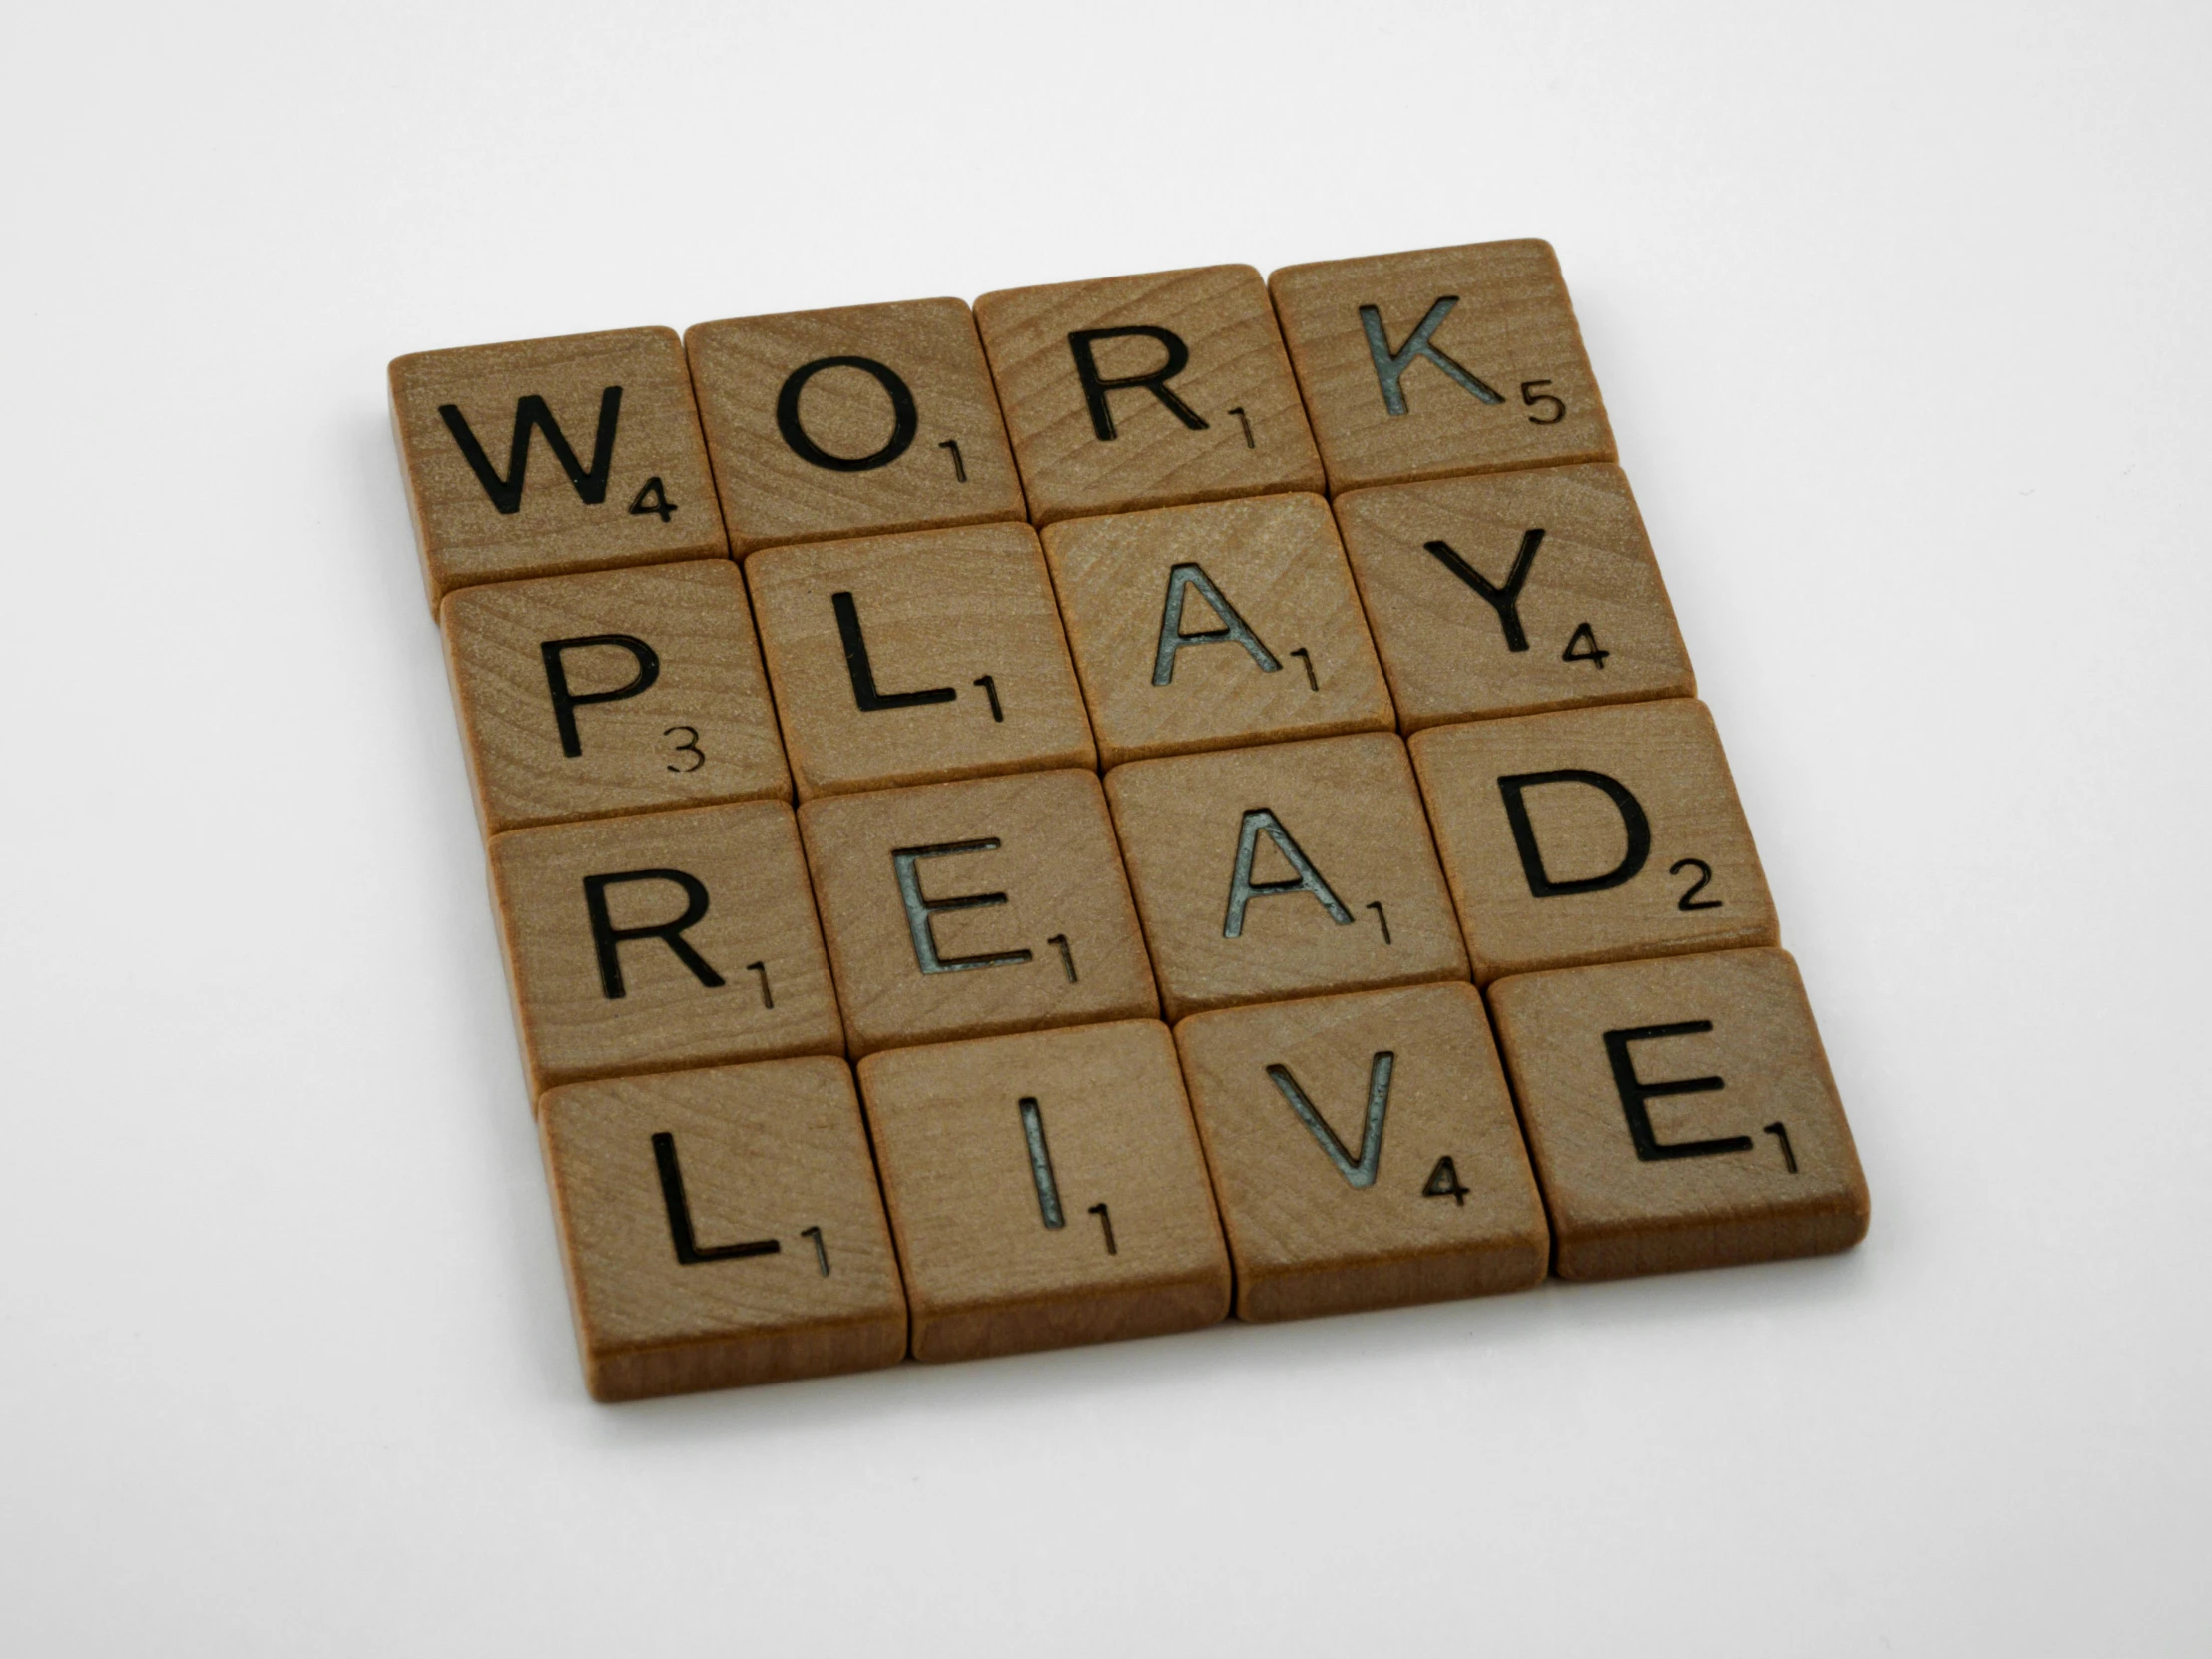 scrabble tiles spelling out words that read work, play, read live